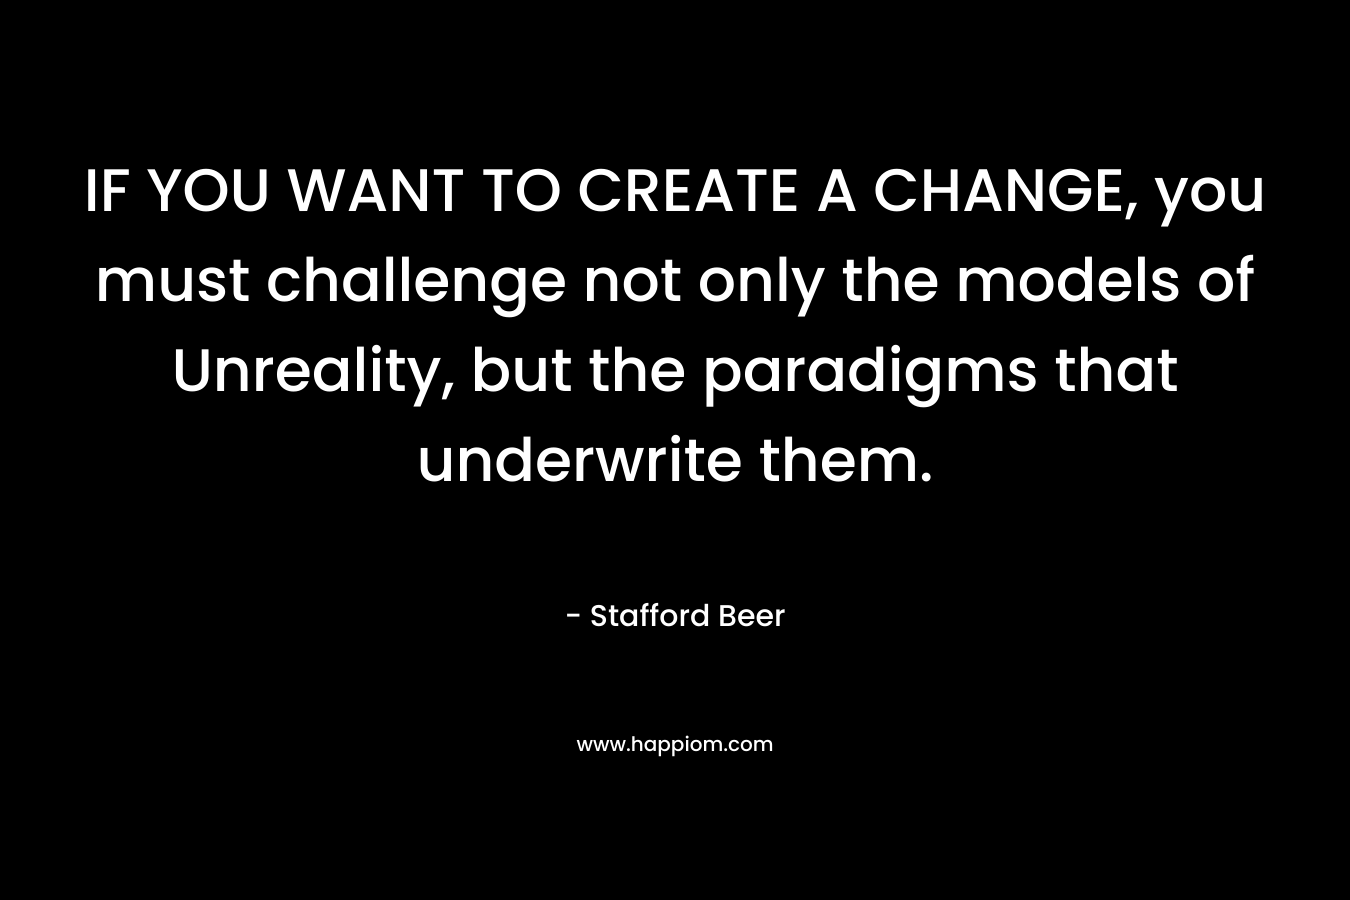 IF YOU WANT TO CREATE A CHANGE, you must challenge not only the models of Unreality, but the paradigms that underwrite them.